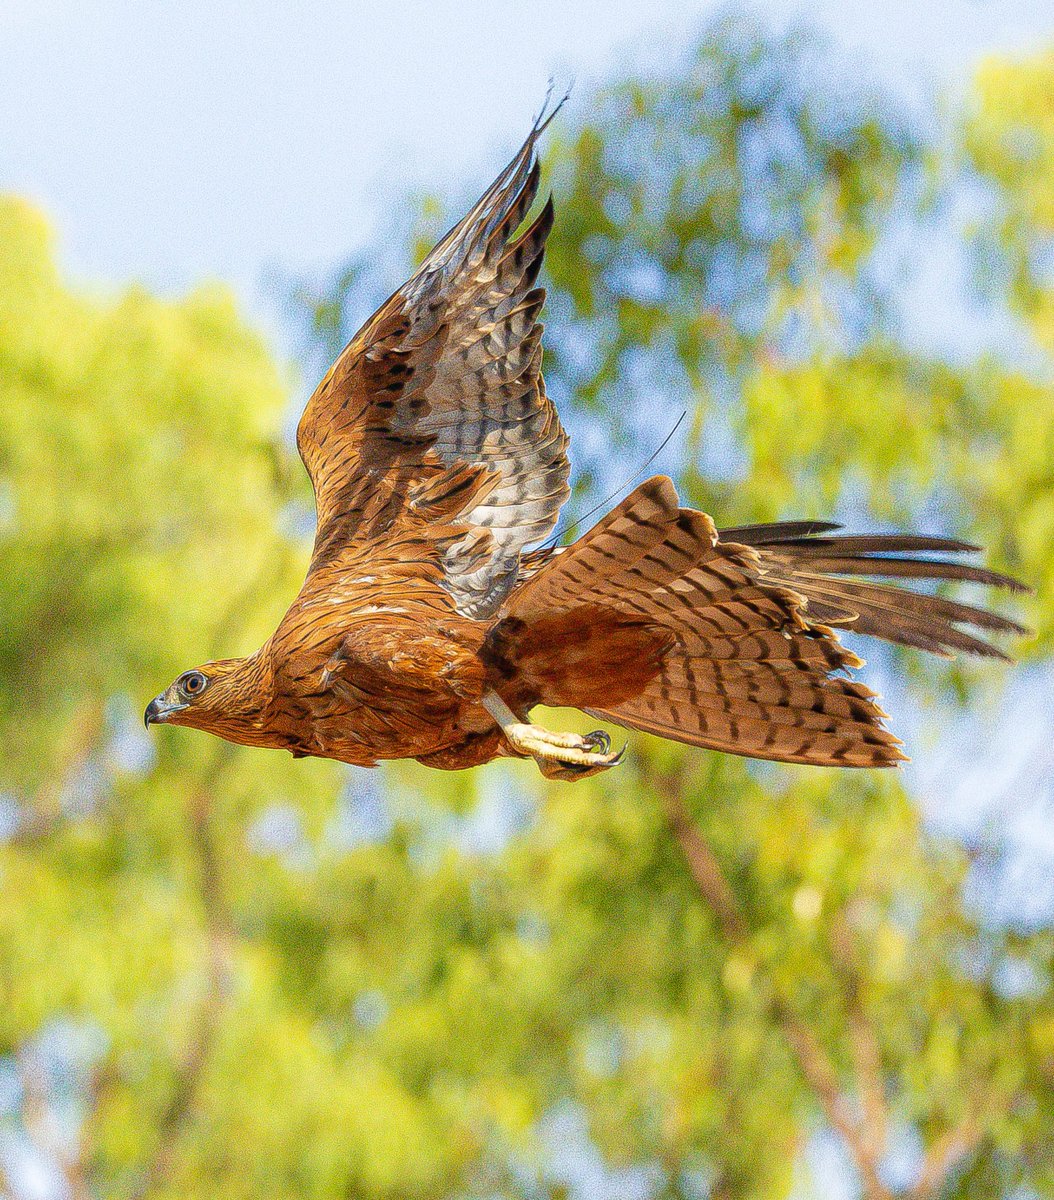 Juvenile male #RedGoshawk fitted with a satellite tracker flying off after release #raptorresearch #threatenedspecies #wildoz